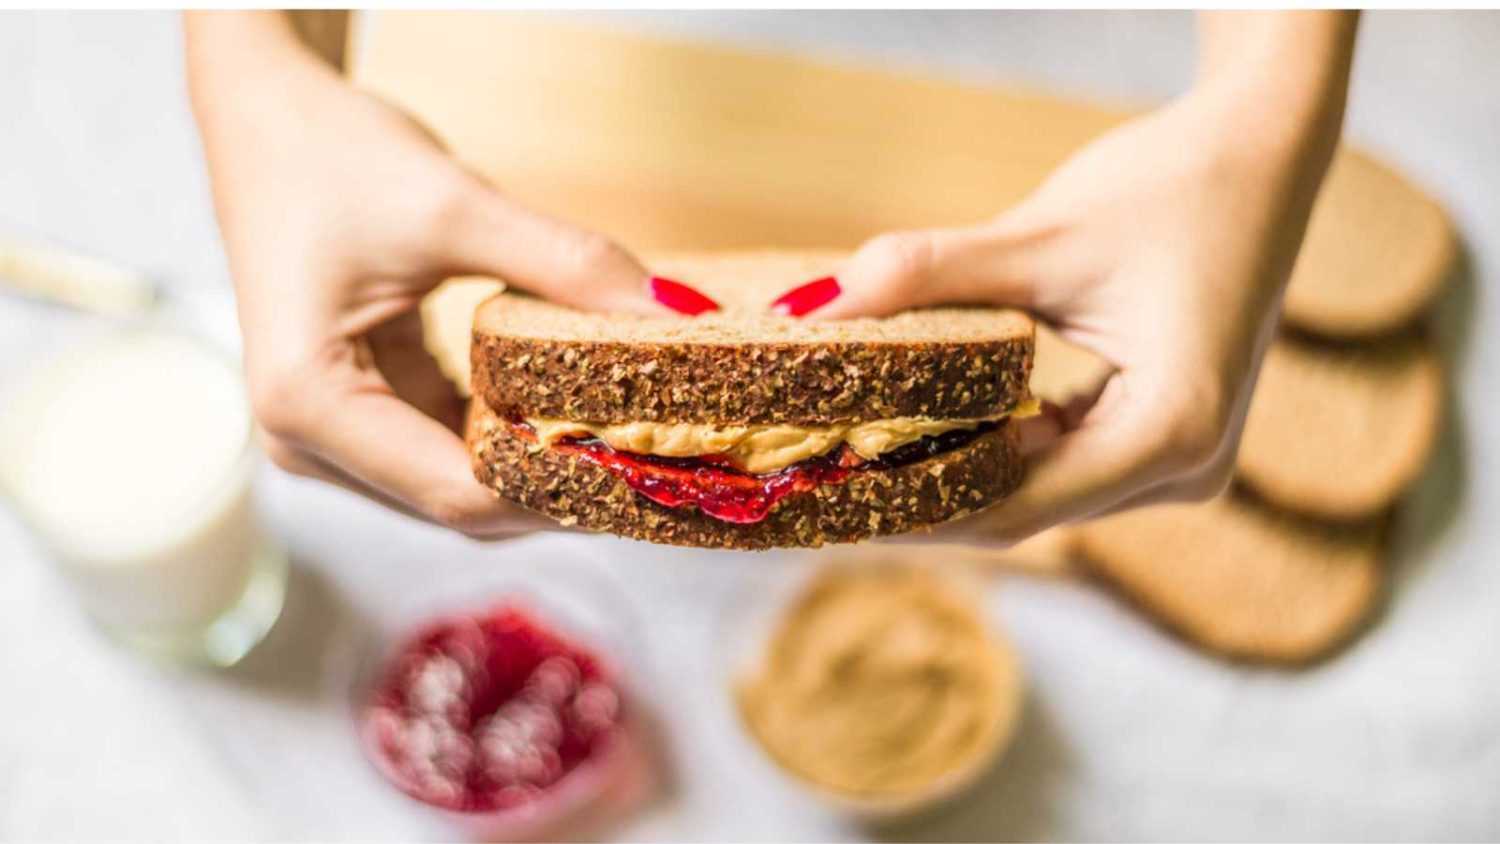 <p>Carrying a jar of peanut butter can get you in trouble, so make a sandwich instead. Grab a squeezy pack if you fear smushing it in your bag. It's an excellent solution for single-time uses. However, have a backup meal ready if someone on the flight has a severe peanut allergy.</p>